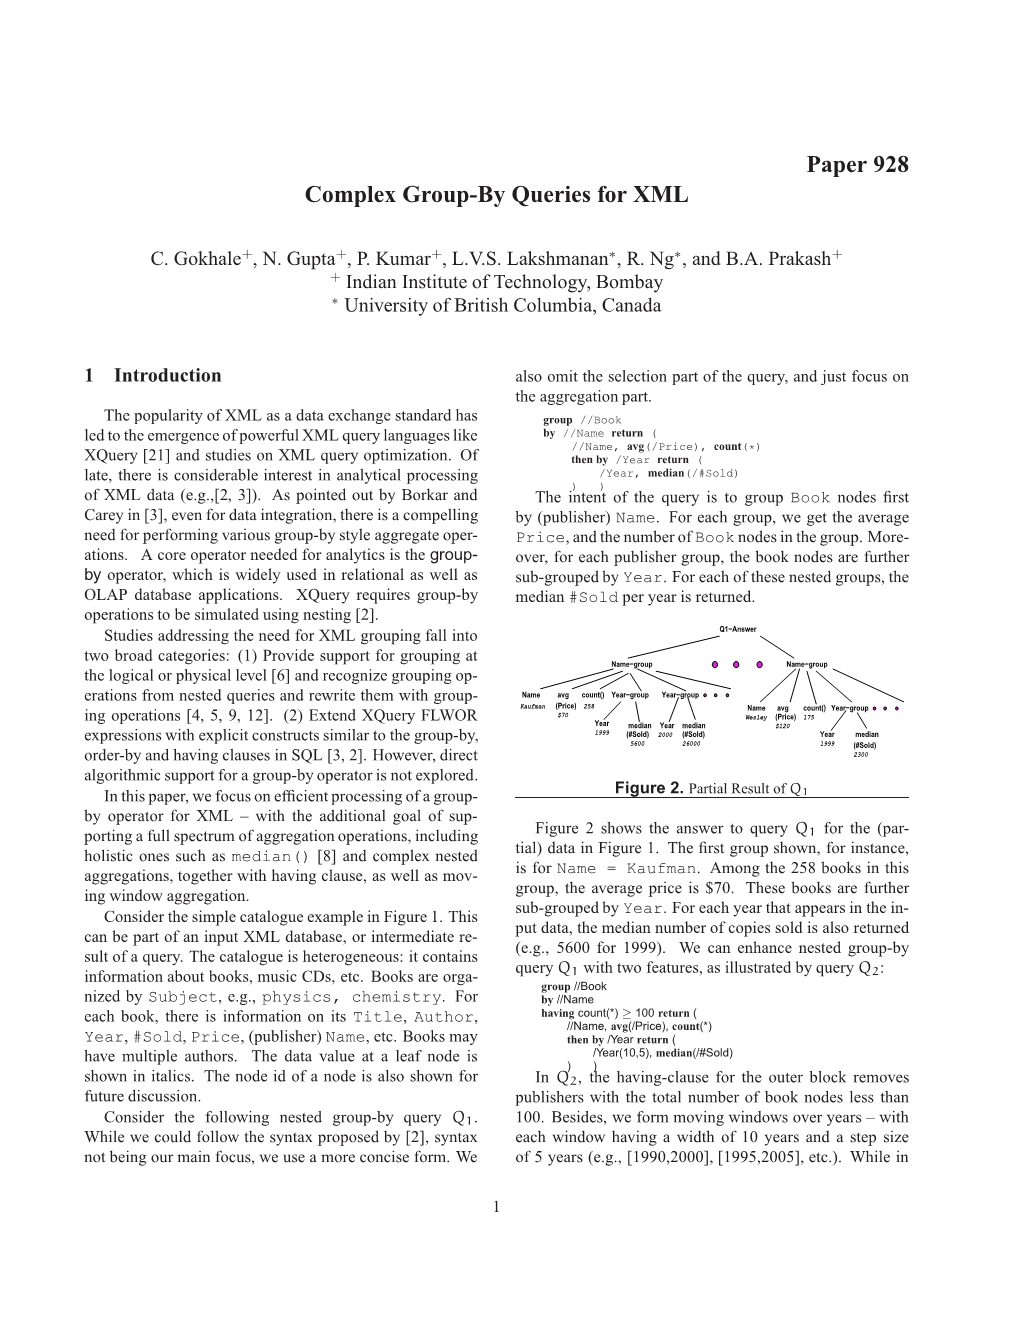 Paper 928 Complex Group-By Queries for XML